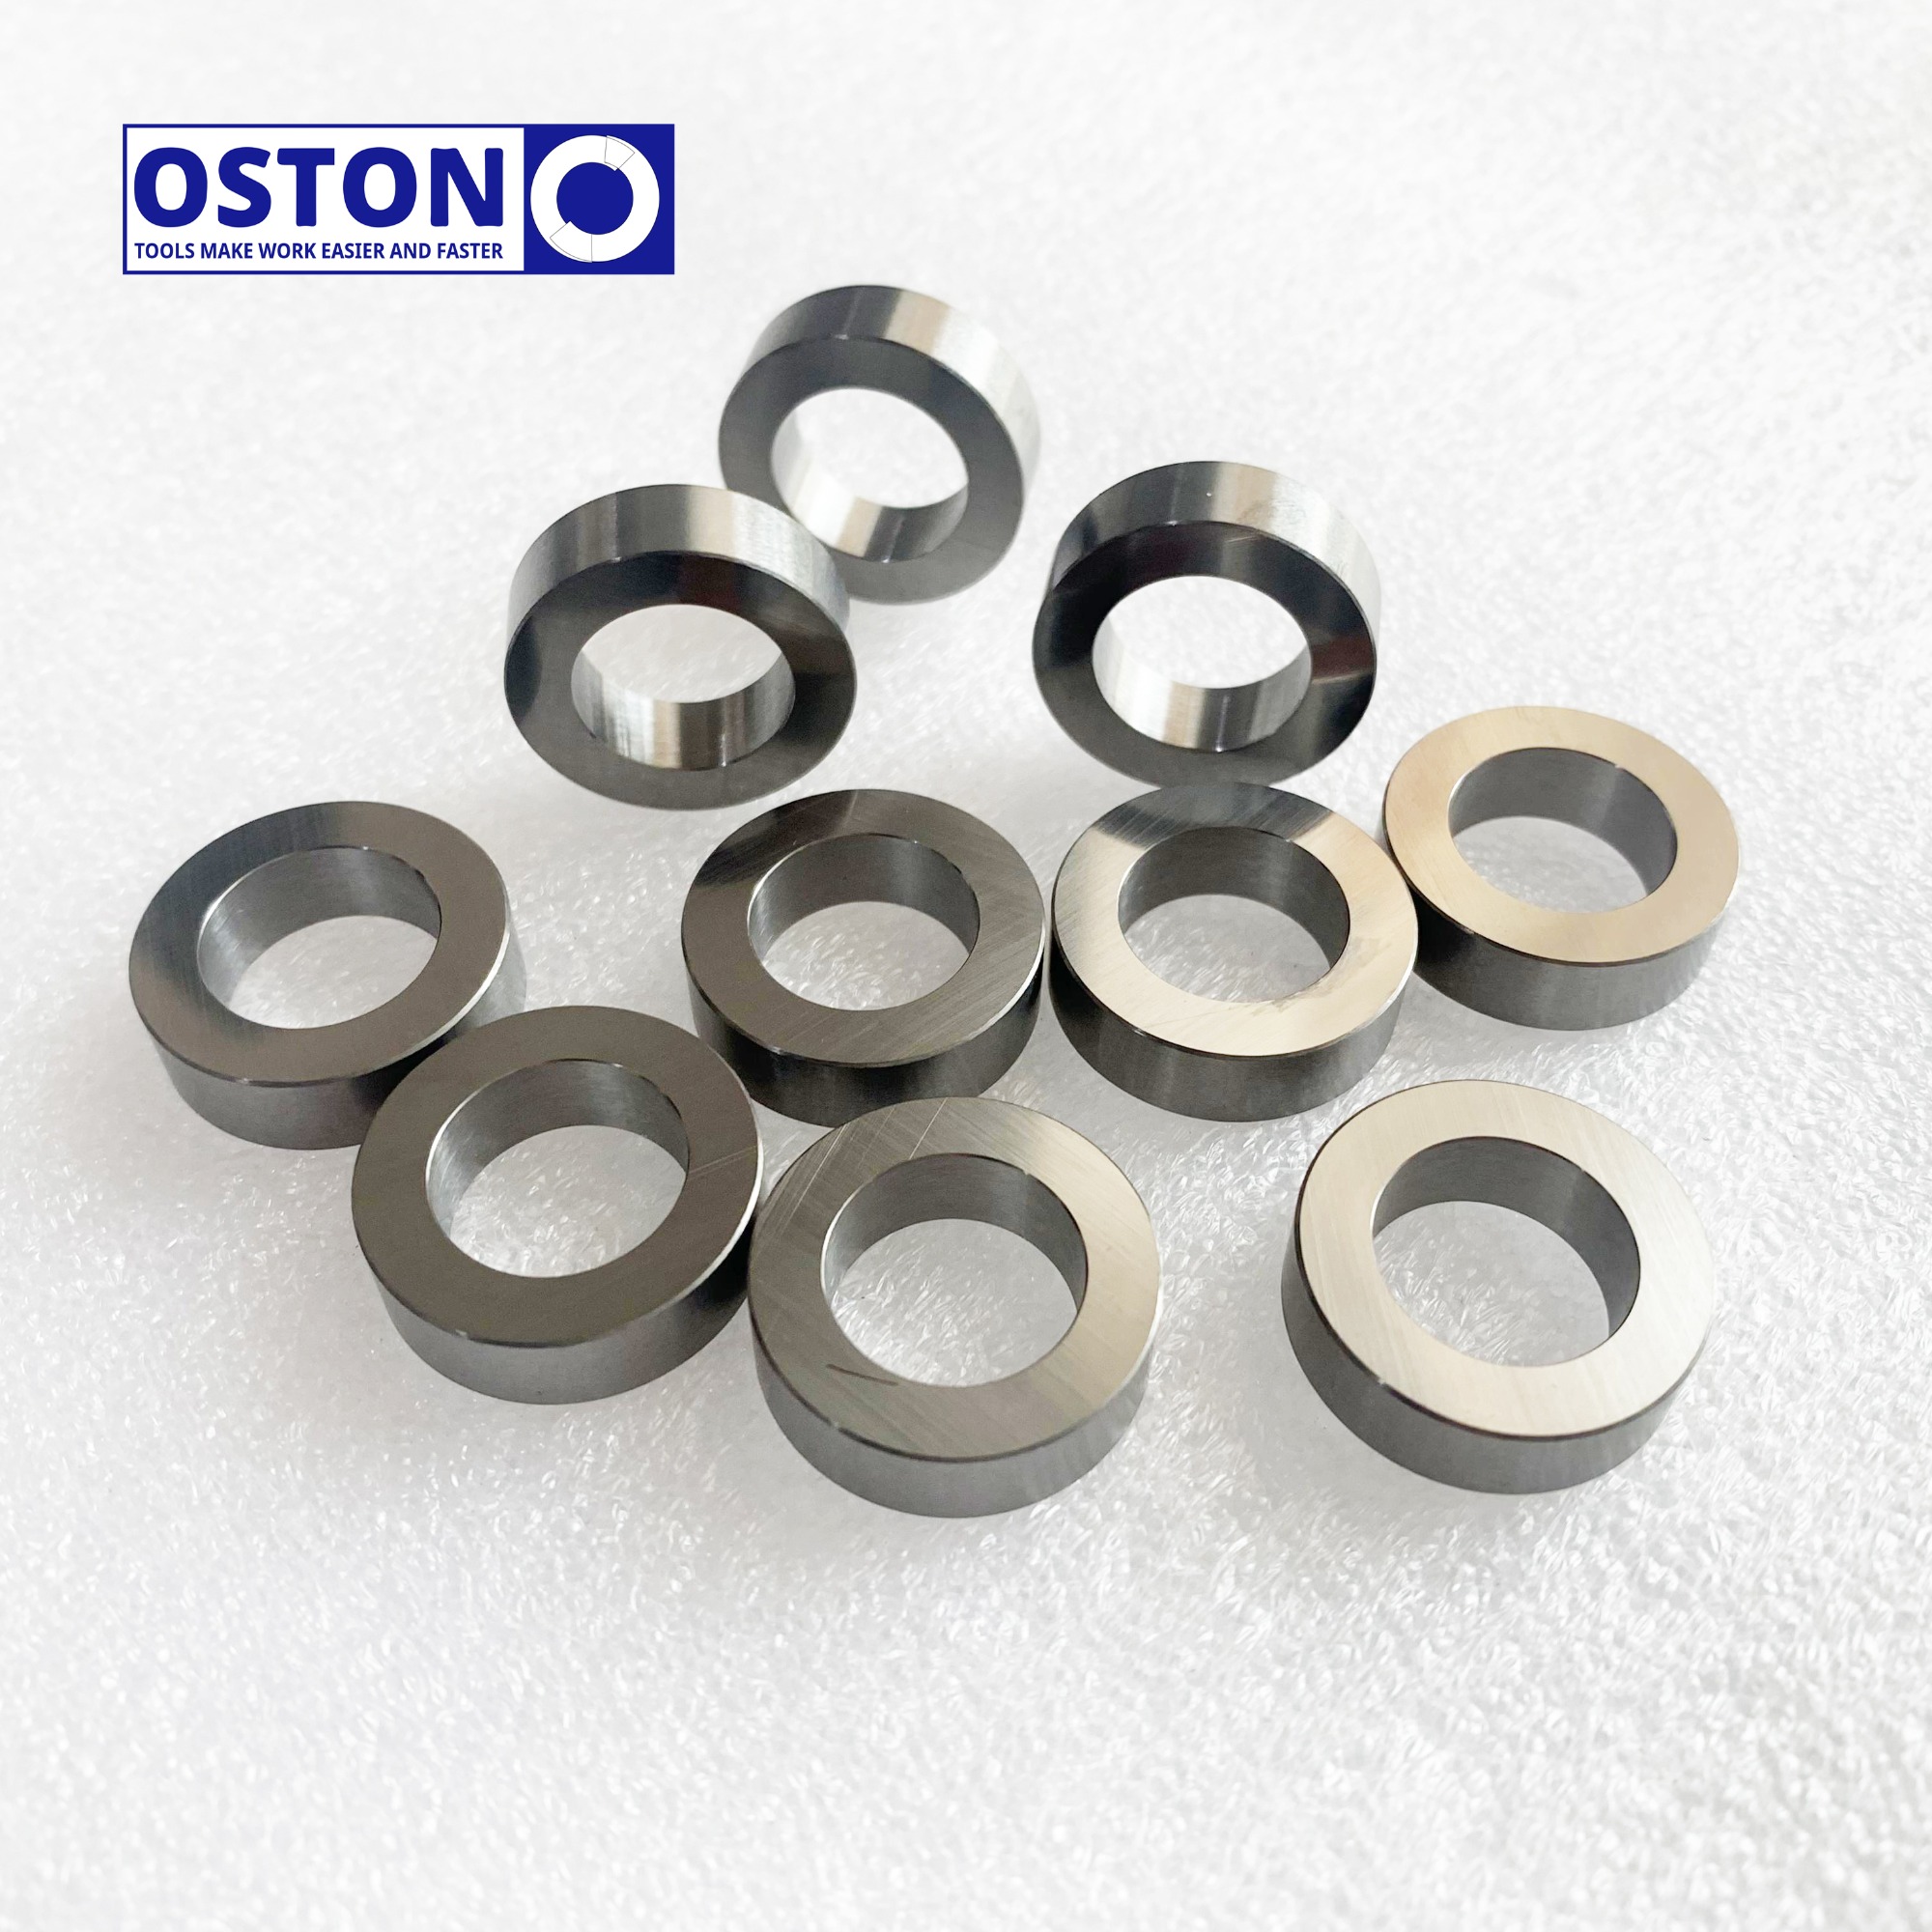 Tungsten Carbide Mechanical Flat Seals for Chemical Pumps